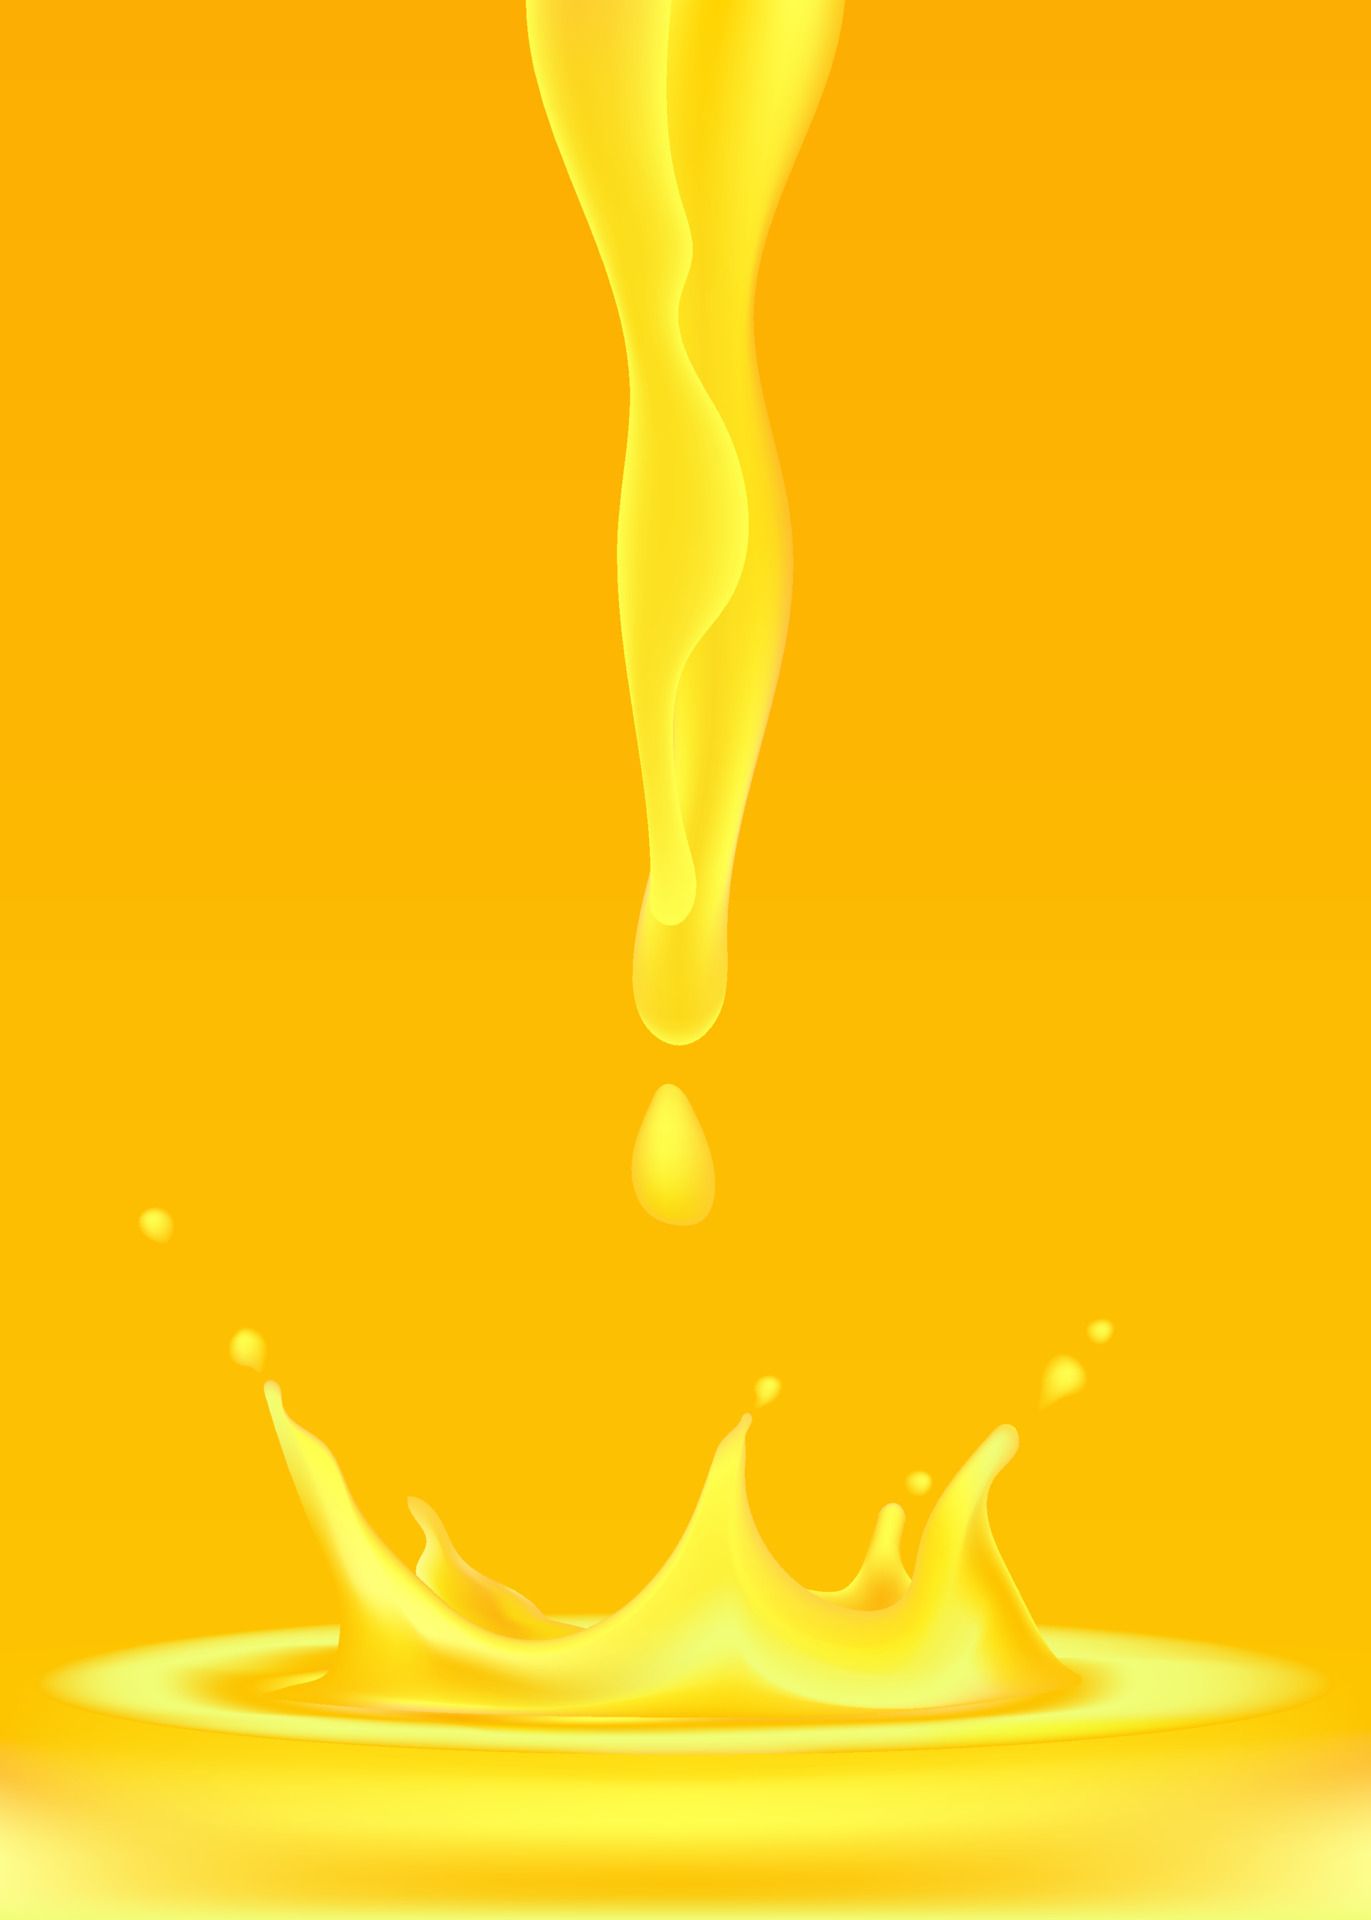 Mango Juice Splash Vector Art, Icons, and Graphics for Free Download